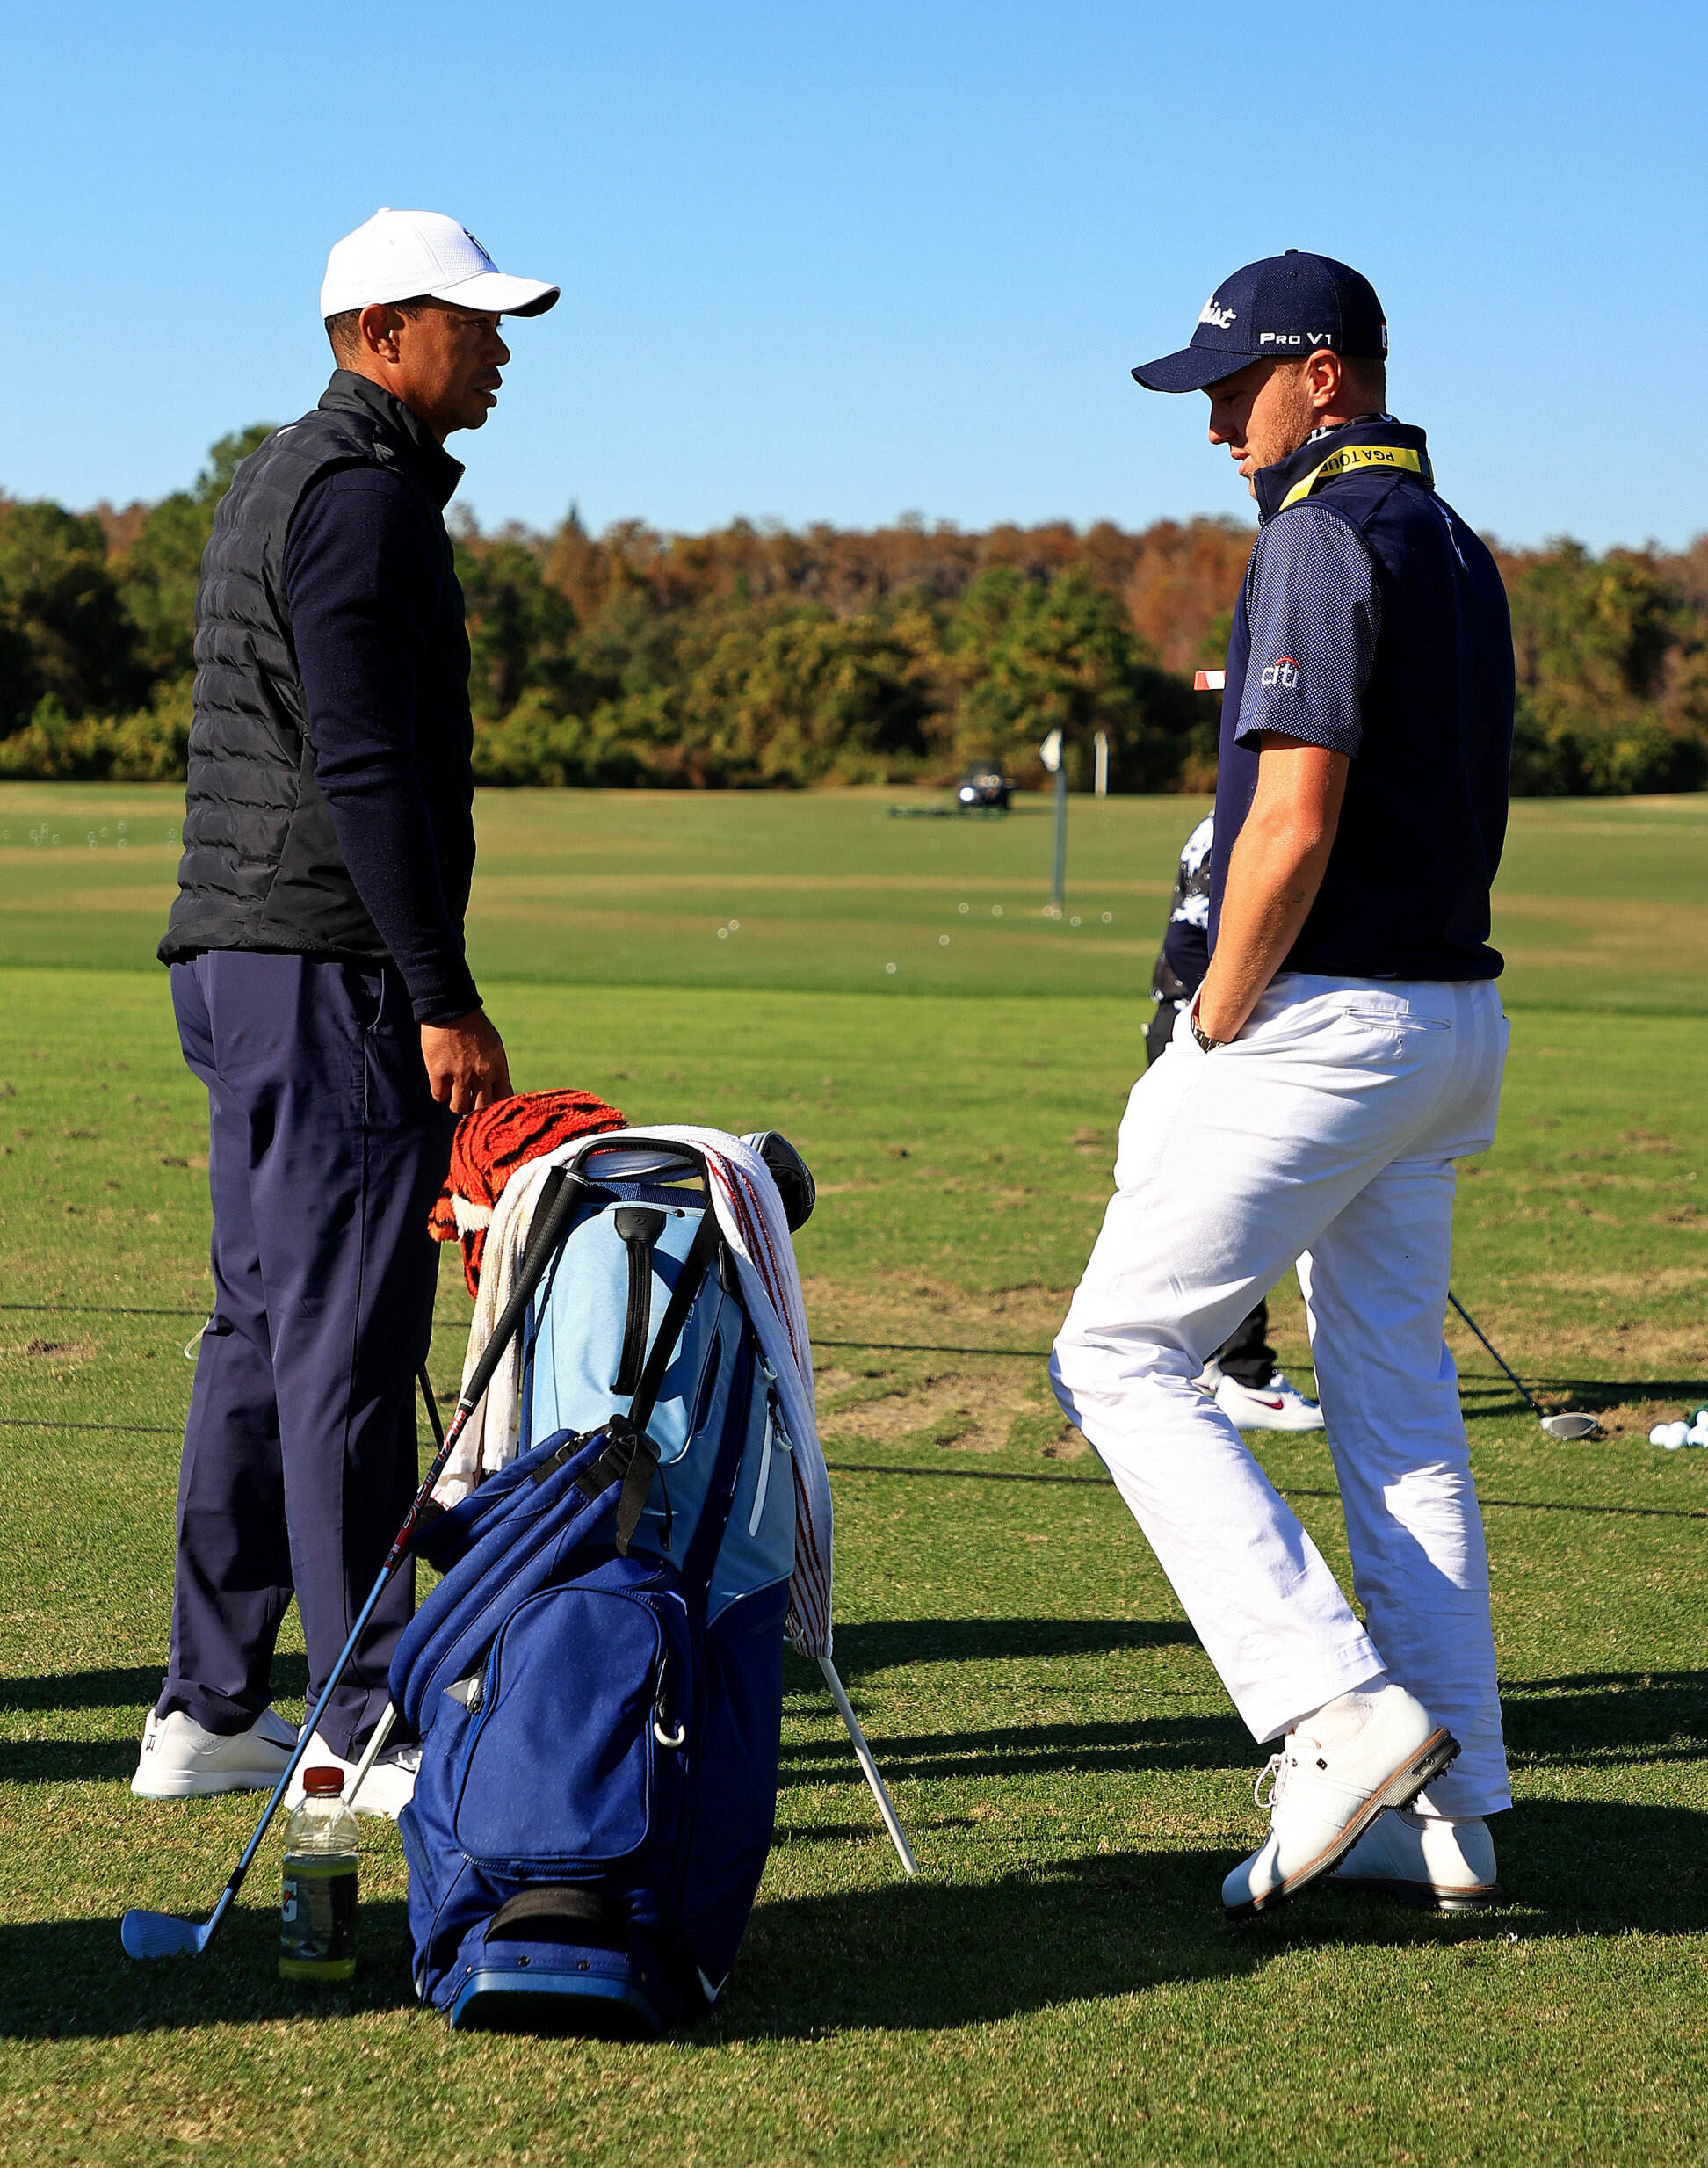  ORLANDO, FLORIDA - DECEMBER 18: Tiger Woods of the United States and  Justin Thomas of the United States talk during the Pro-Am for the PNC Championship at the Ritz Carlton Golf Club on December 18, 2020 in Orlando, Florida. (Photo by Mike Ehrmann/G